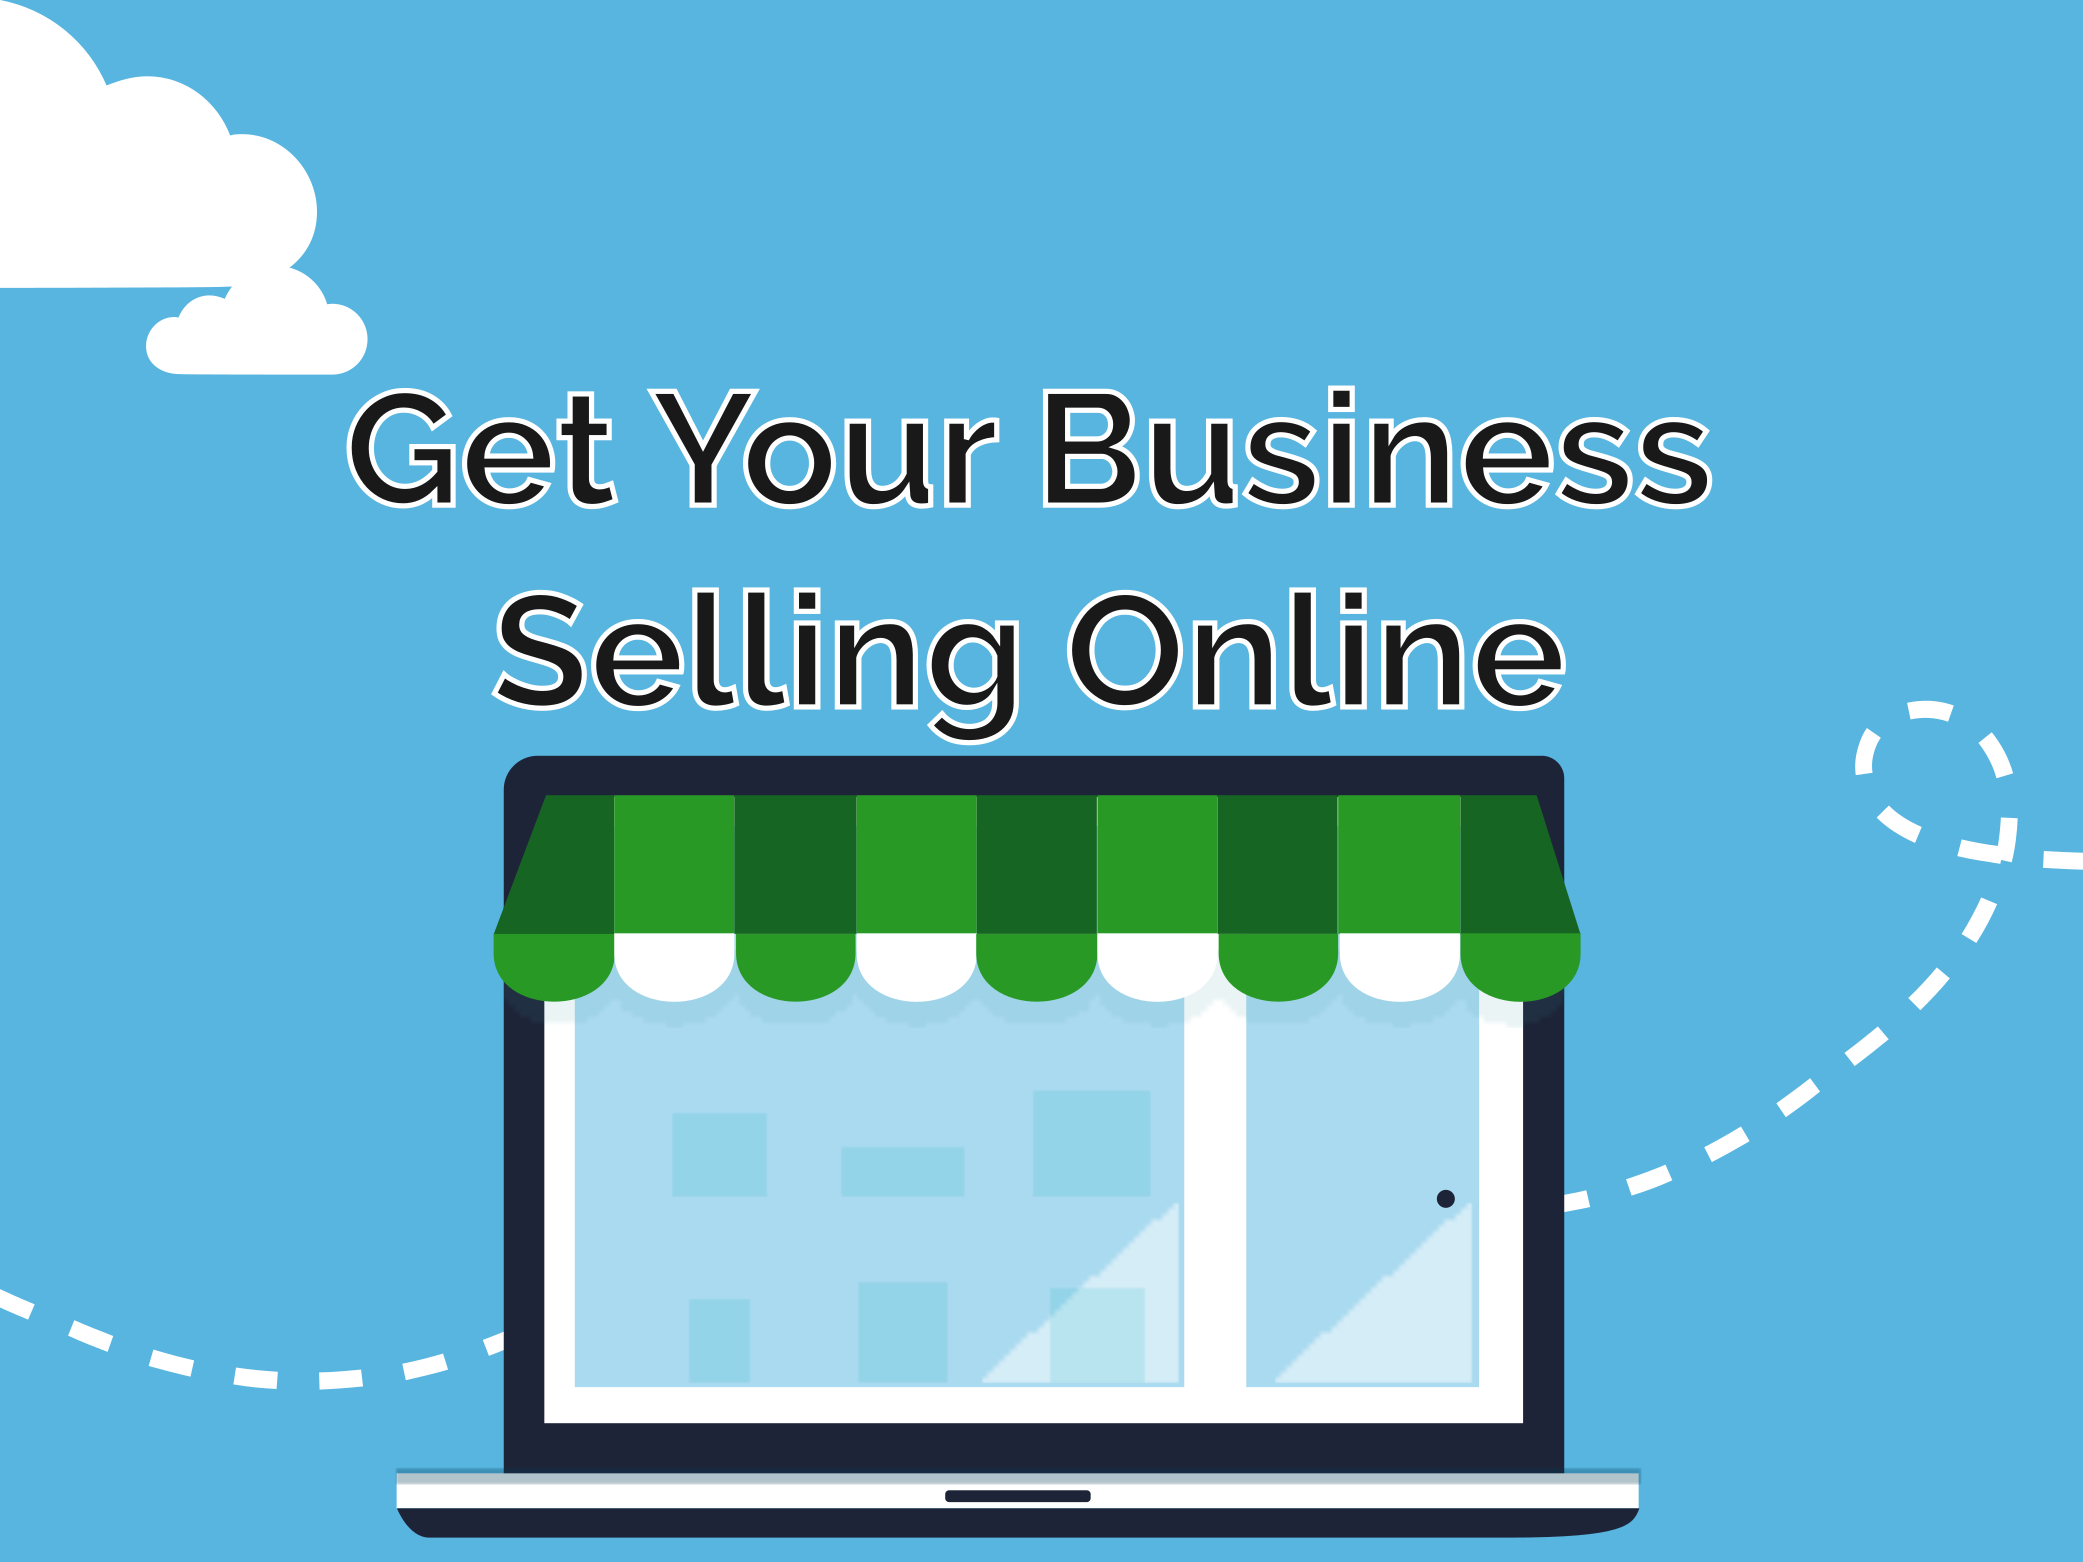 Get Your Business Selling Online with an awning on a laptop sitting in front of a bright blue sky.